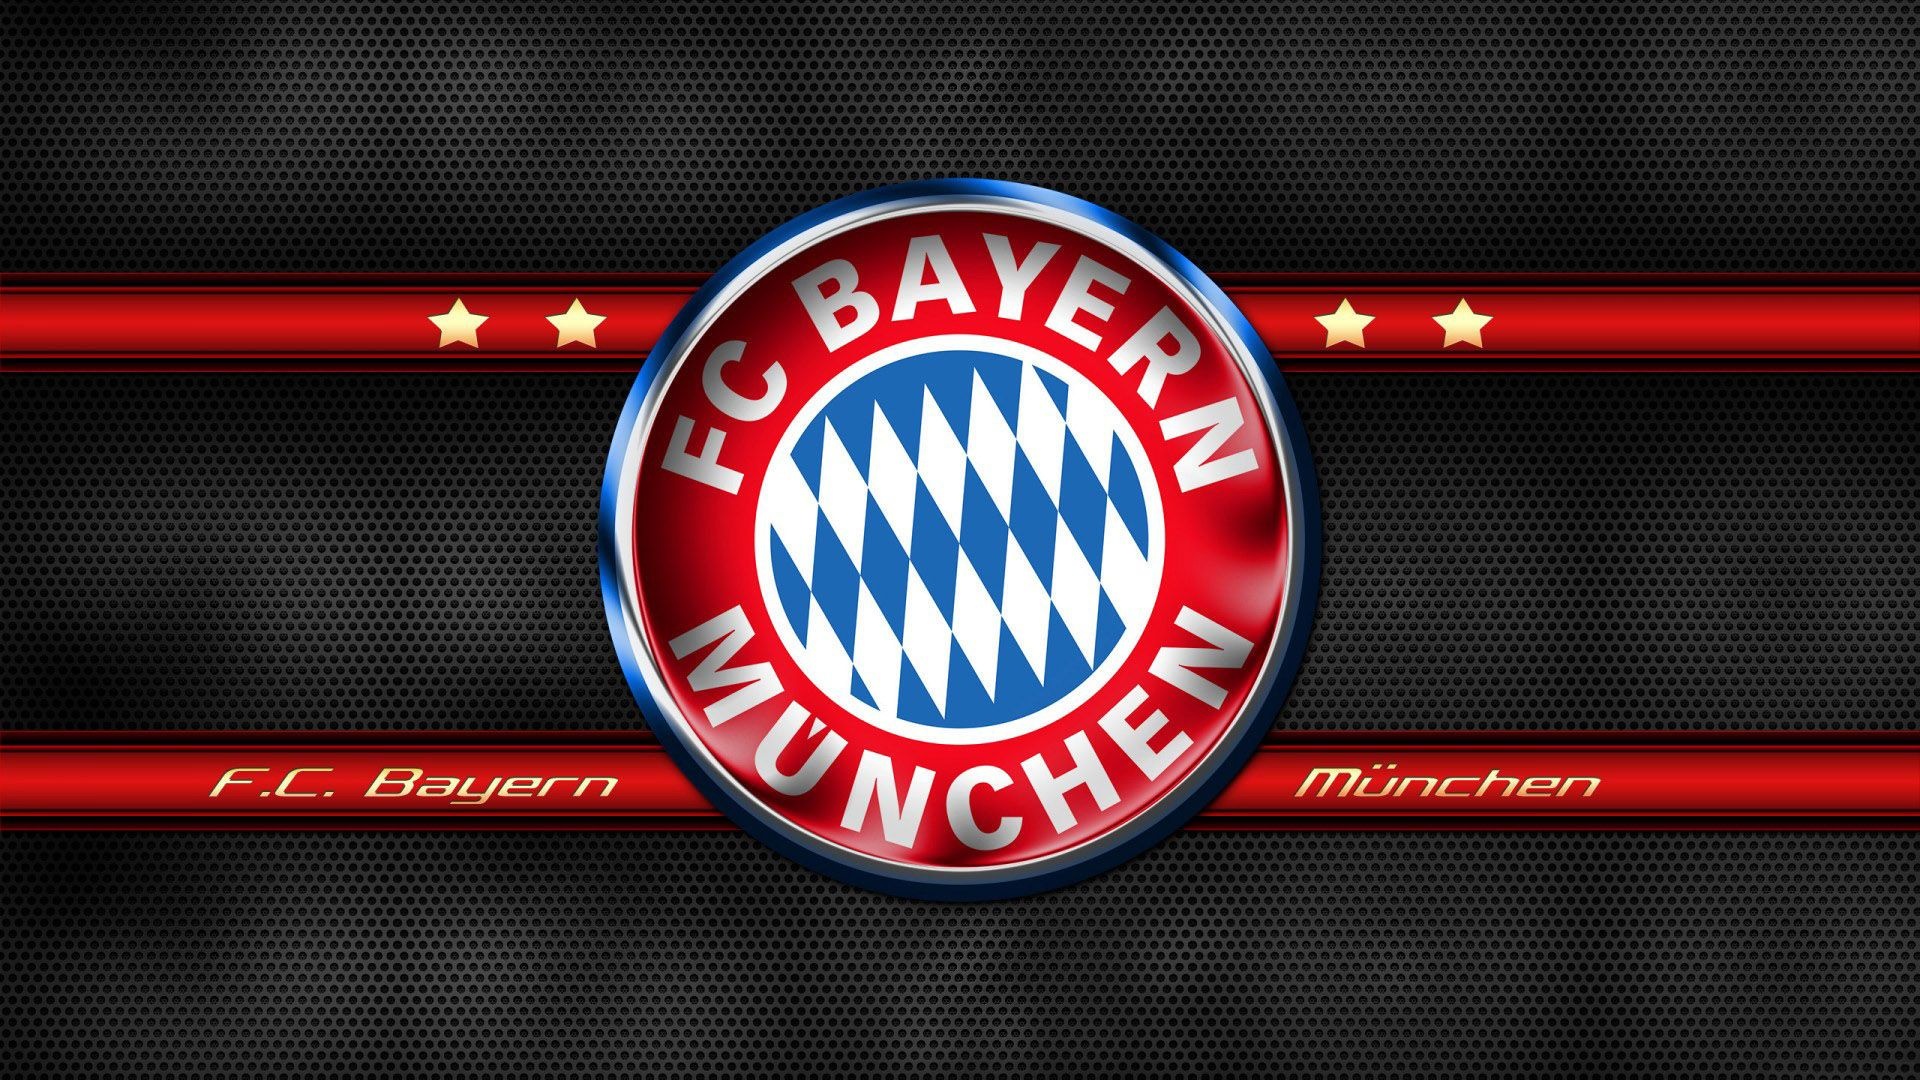 Bayern Munchen FC: FC, The crest shows the white and blue flag of Bavaria. 1920x1080 Full HD Background.